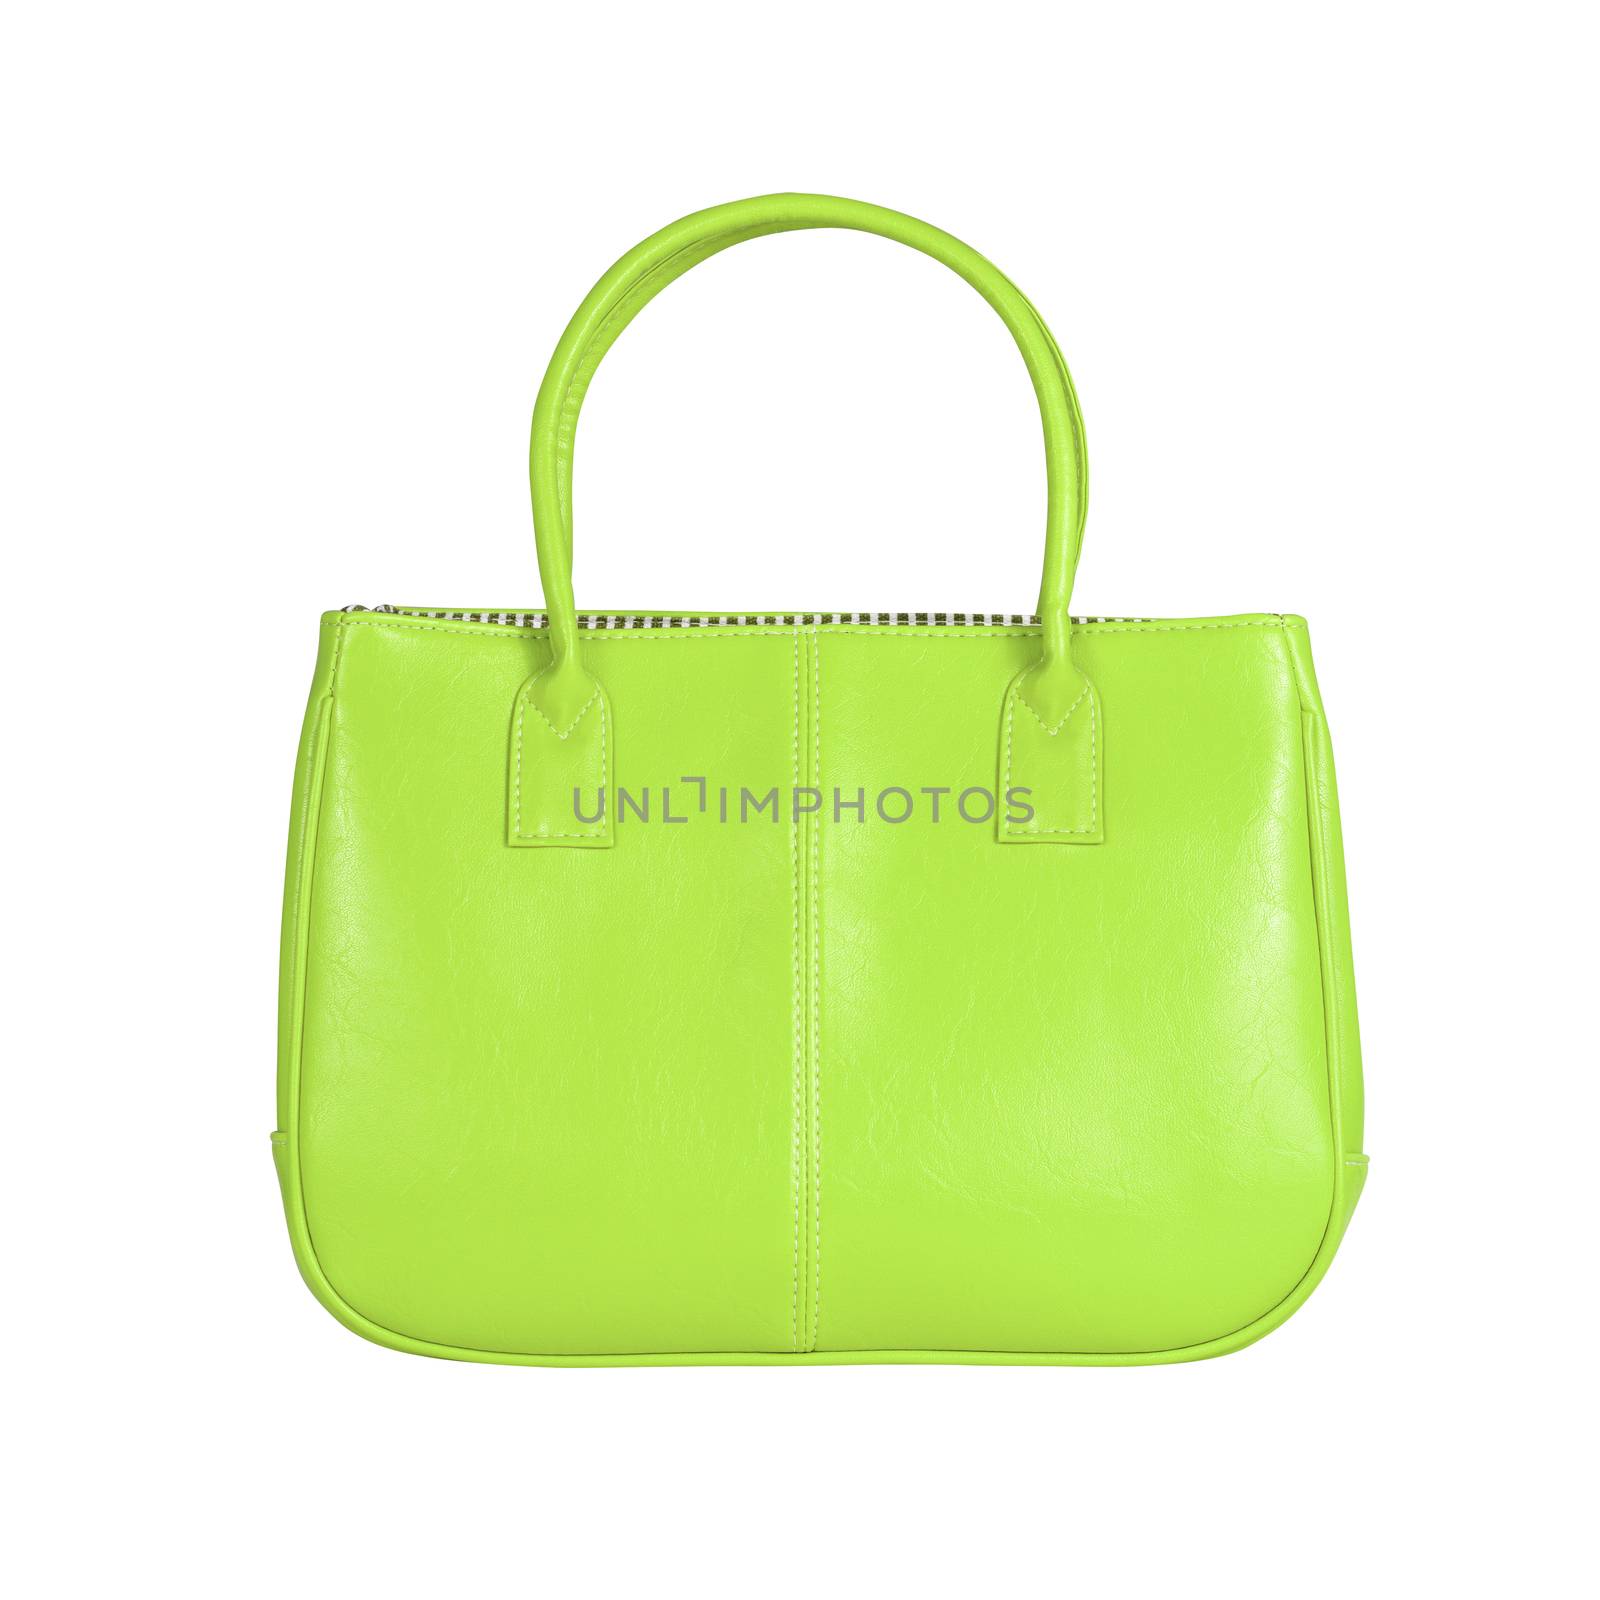 High-resolution image of an isolated green leather handbag on white background. High-quality clipping path included.